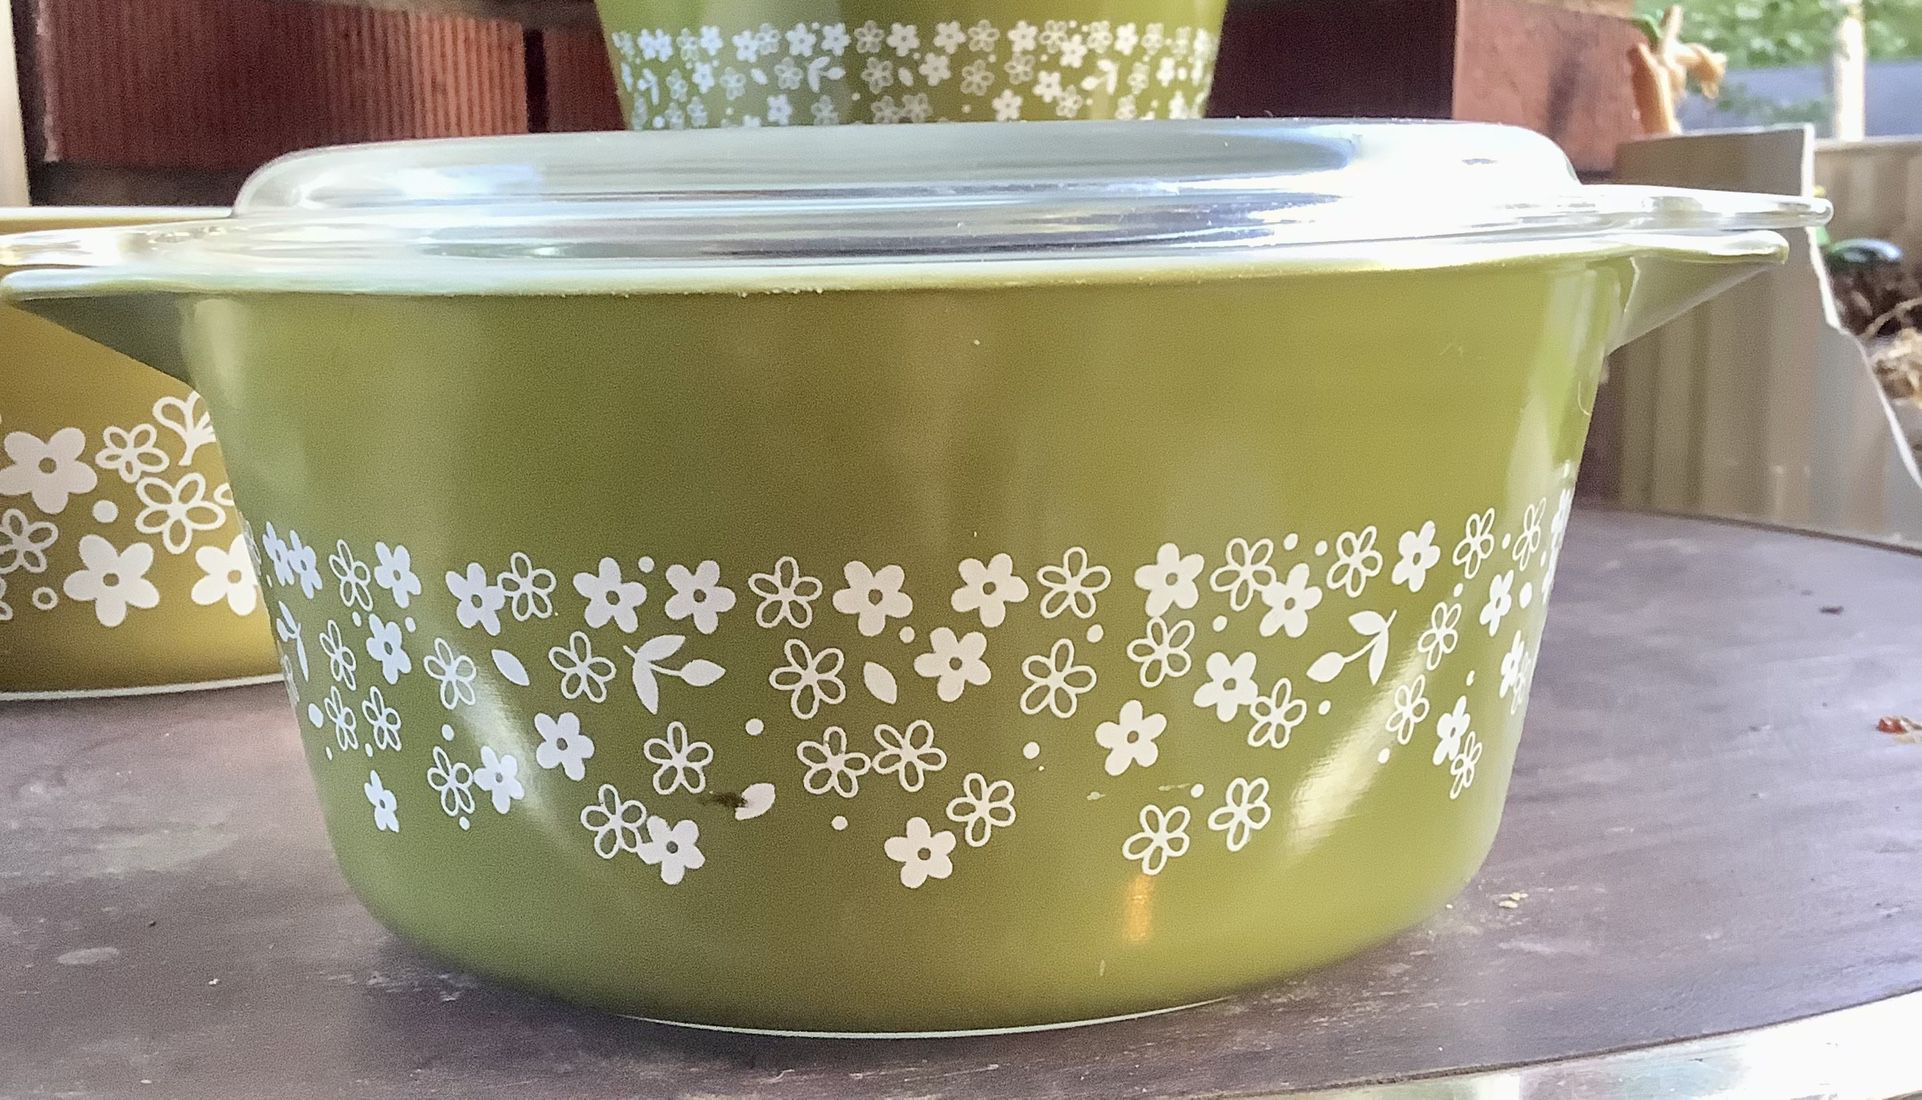 Spring Blossom Pyrex Various Prices All With Buyer Paying Shipping And PayPal Invoice